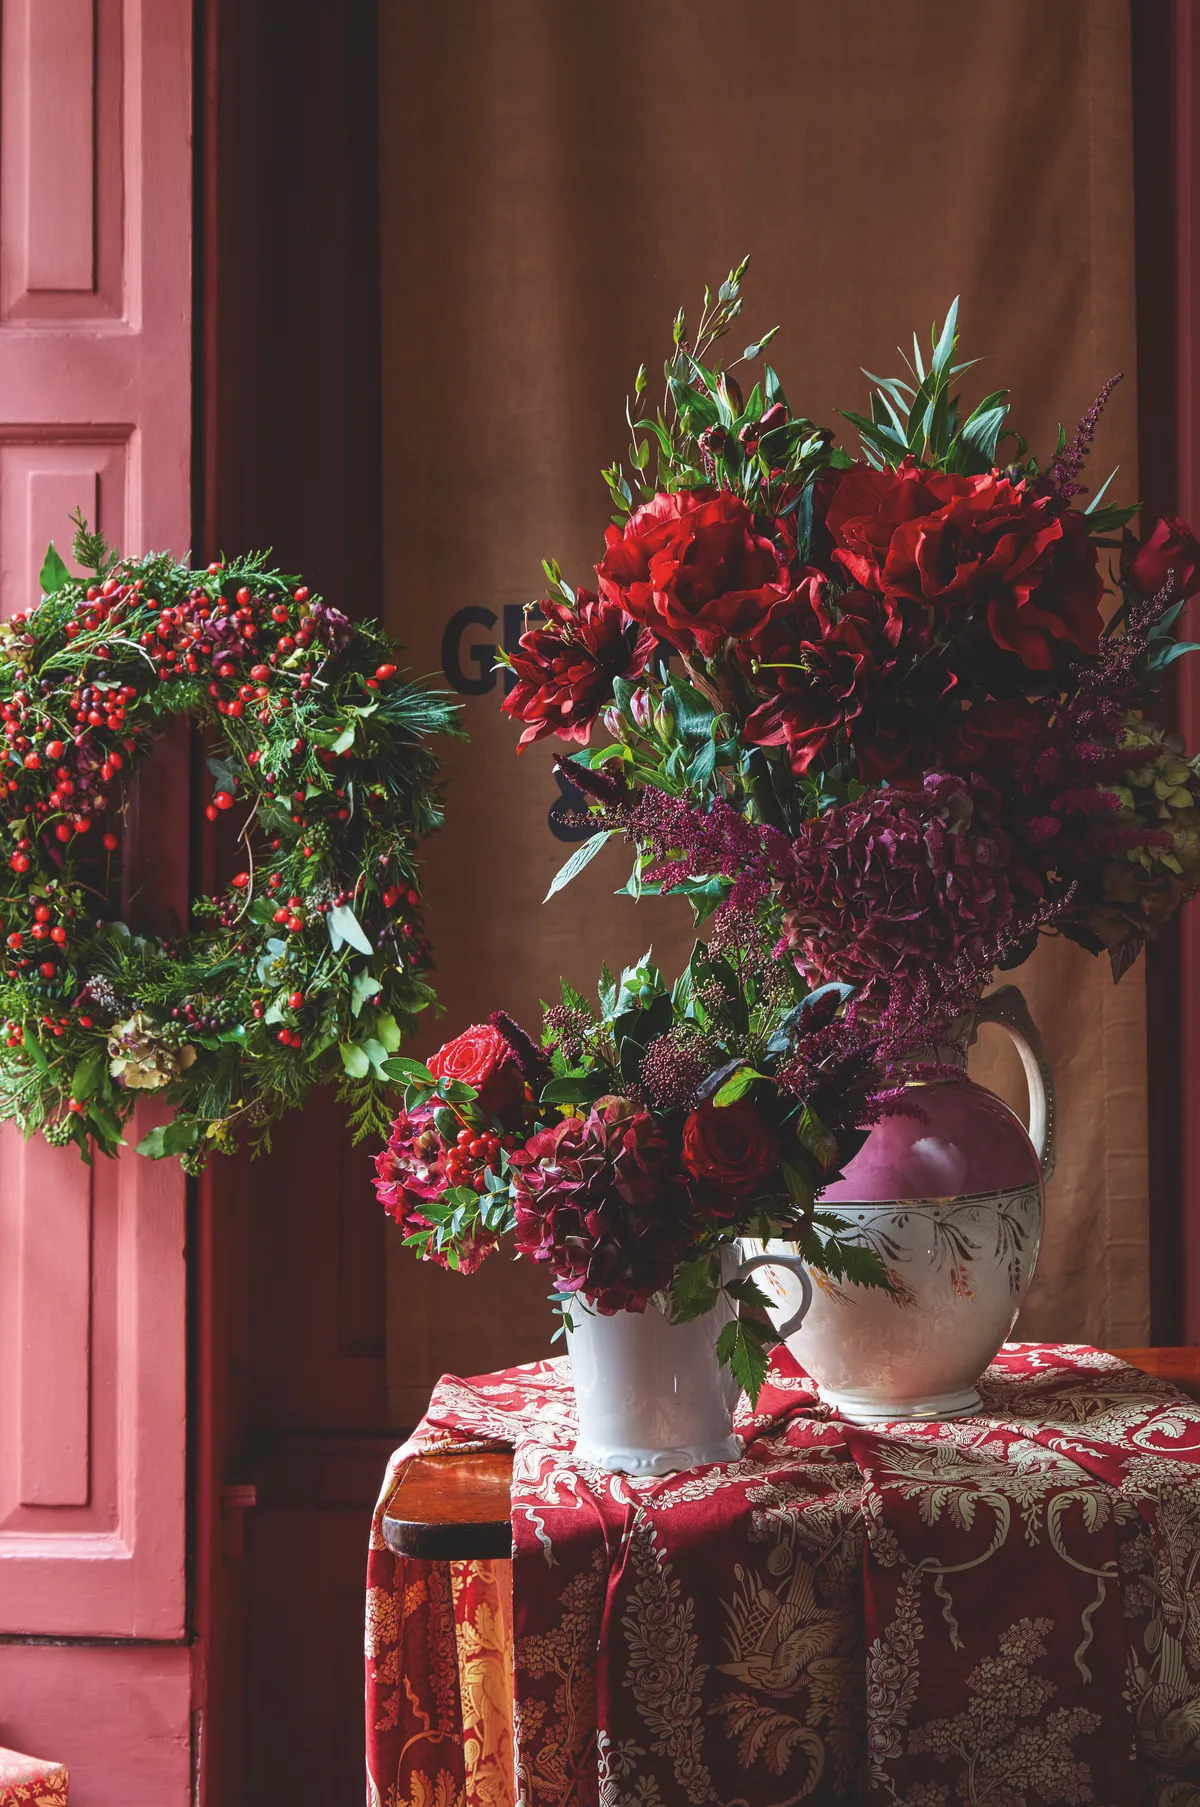 Bring floral touches into your home to enhance your winter decor, whether you’re designing a centrepiece for your Christmas table or a display for your hallway. Mix greenery from the garden with plenty of scarlet blooms – here, we’ve mixed a few faux amaryllis along with freshly cut roses